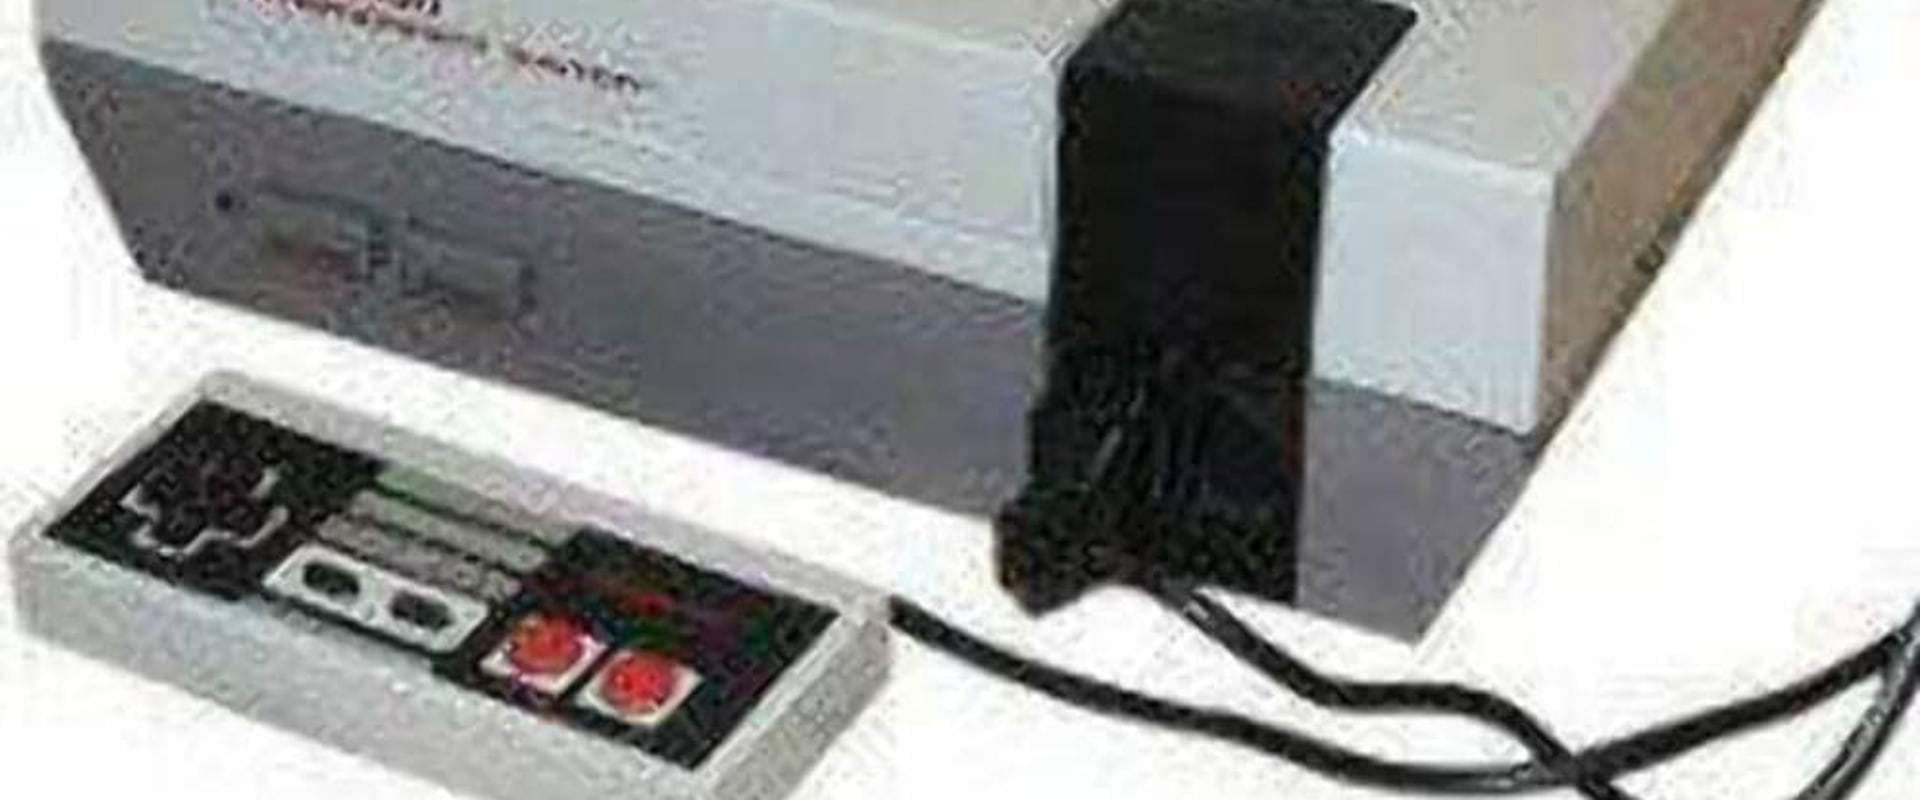 A Look at the Nintendo Entertainment System (NES)